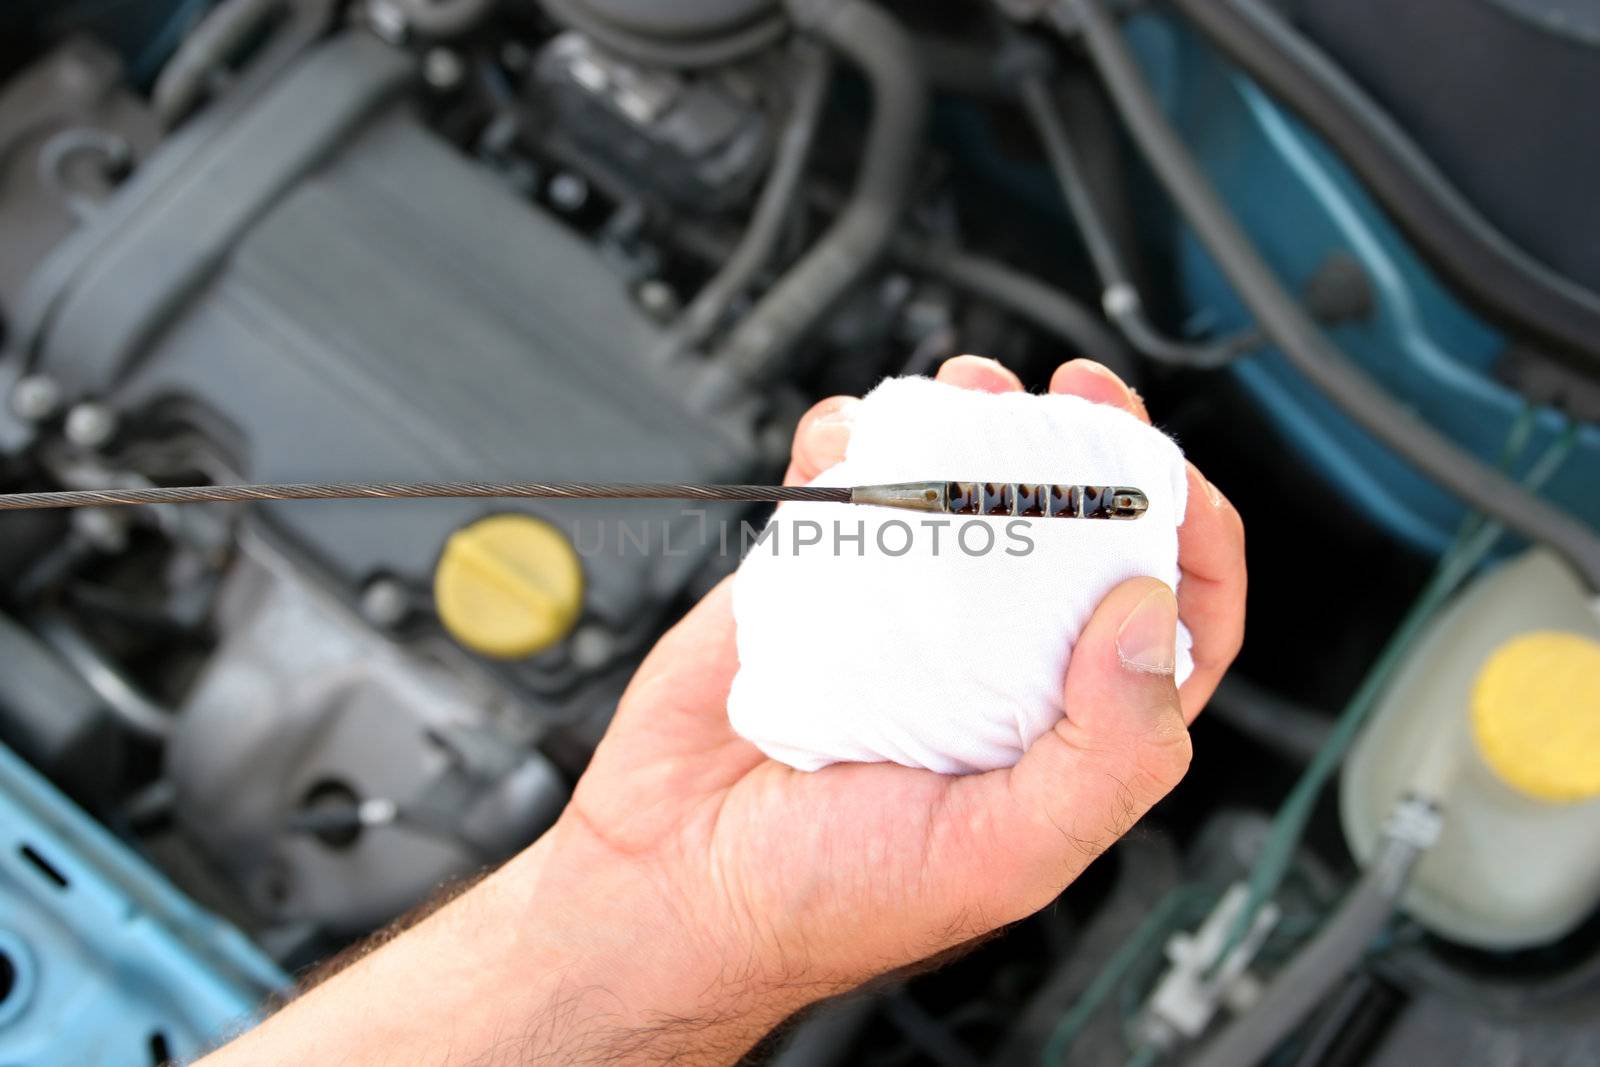 Details checking engine oil dipstick in car